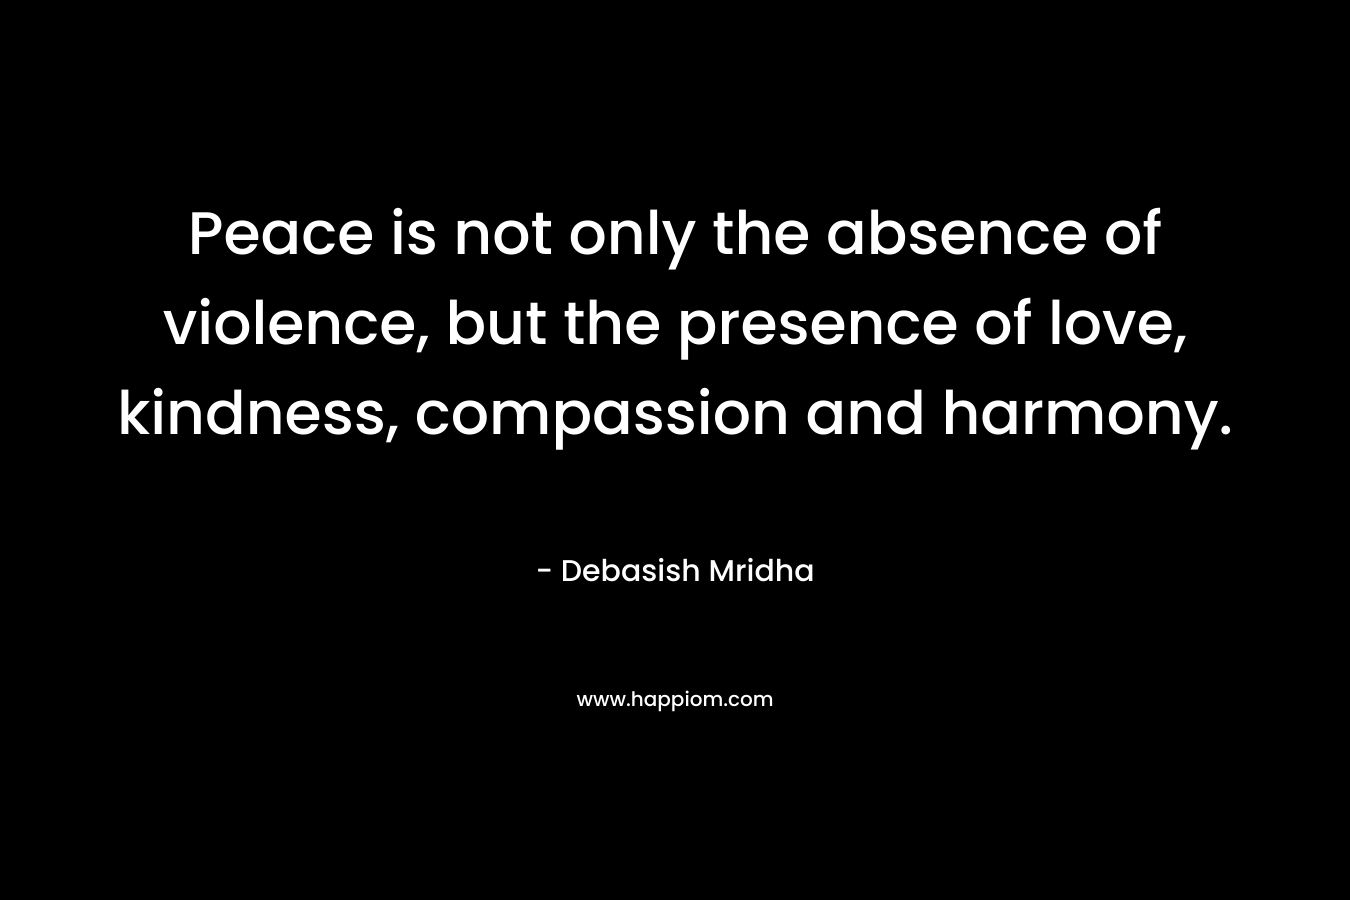 Peace is not only the absence of violence, but the presence of love, kindness, compassion and harmony.